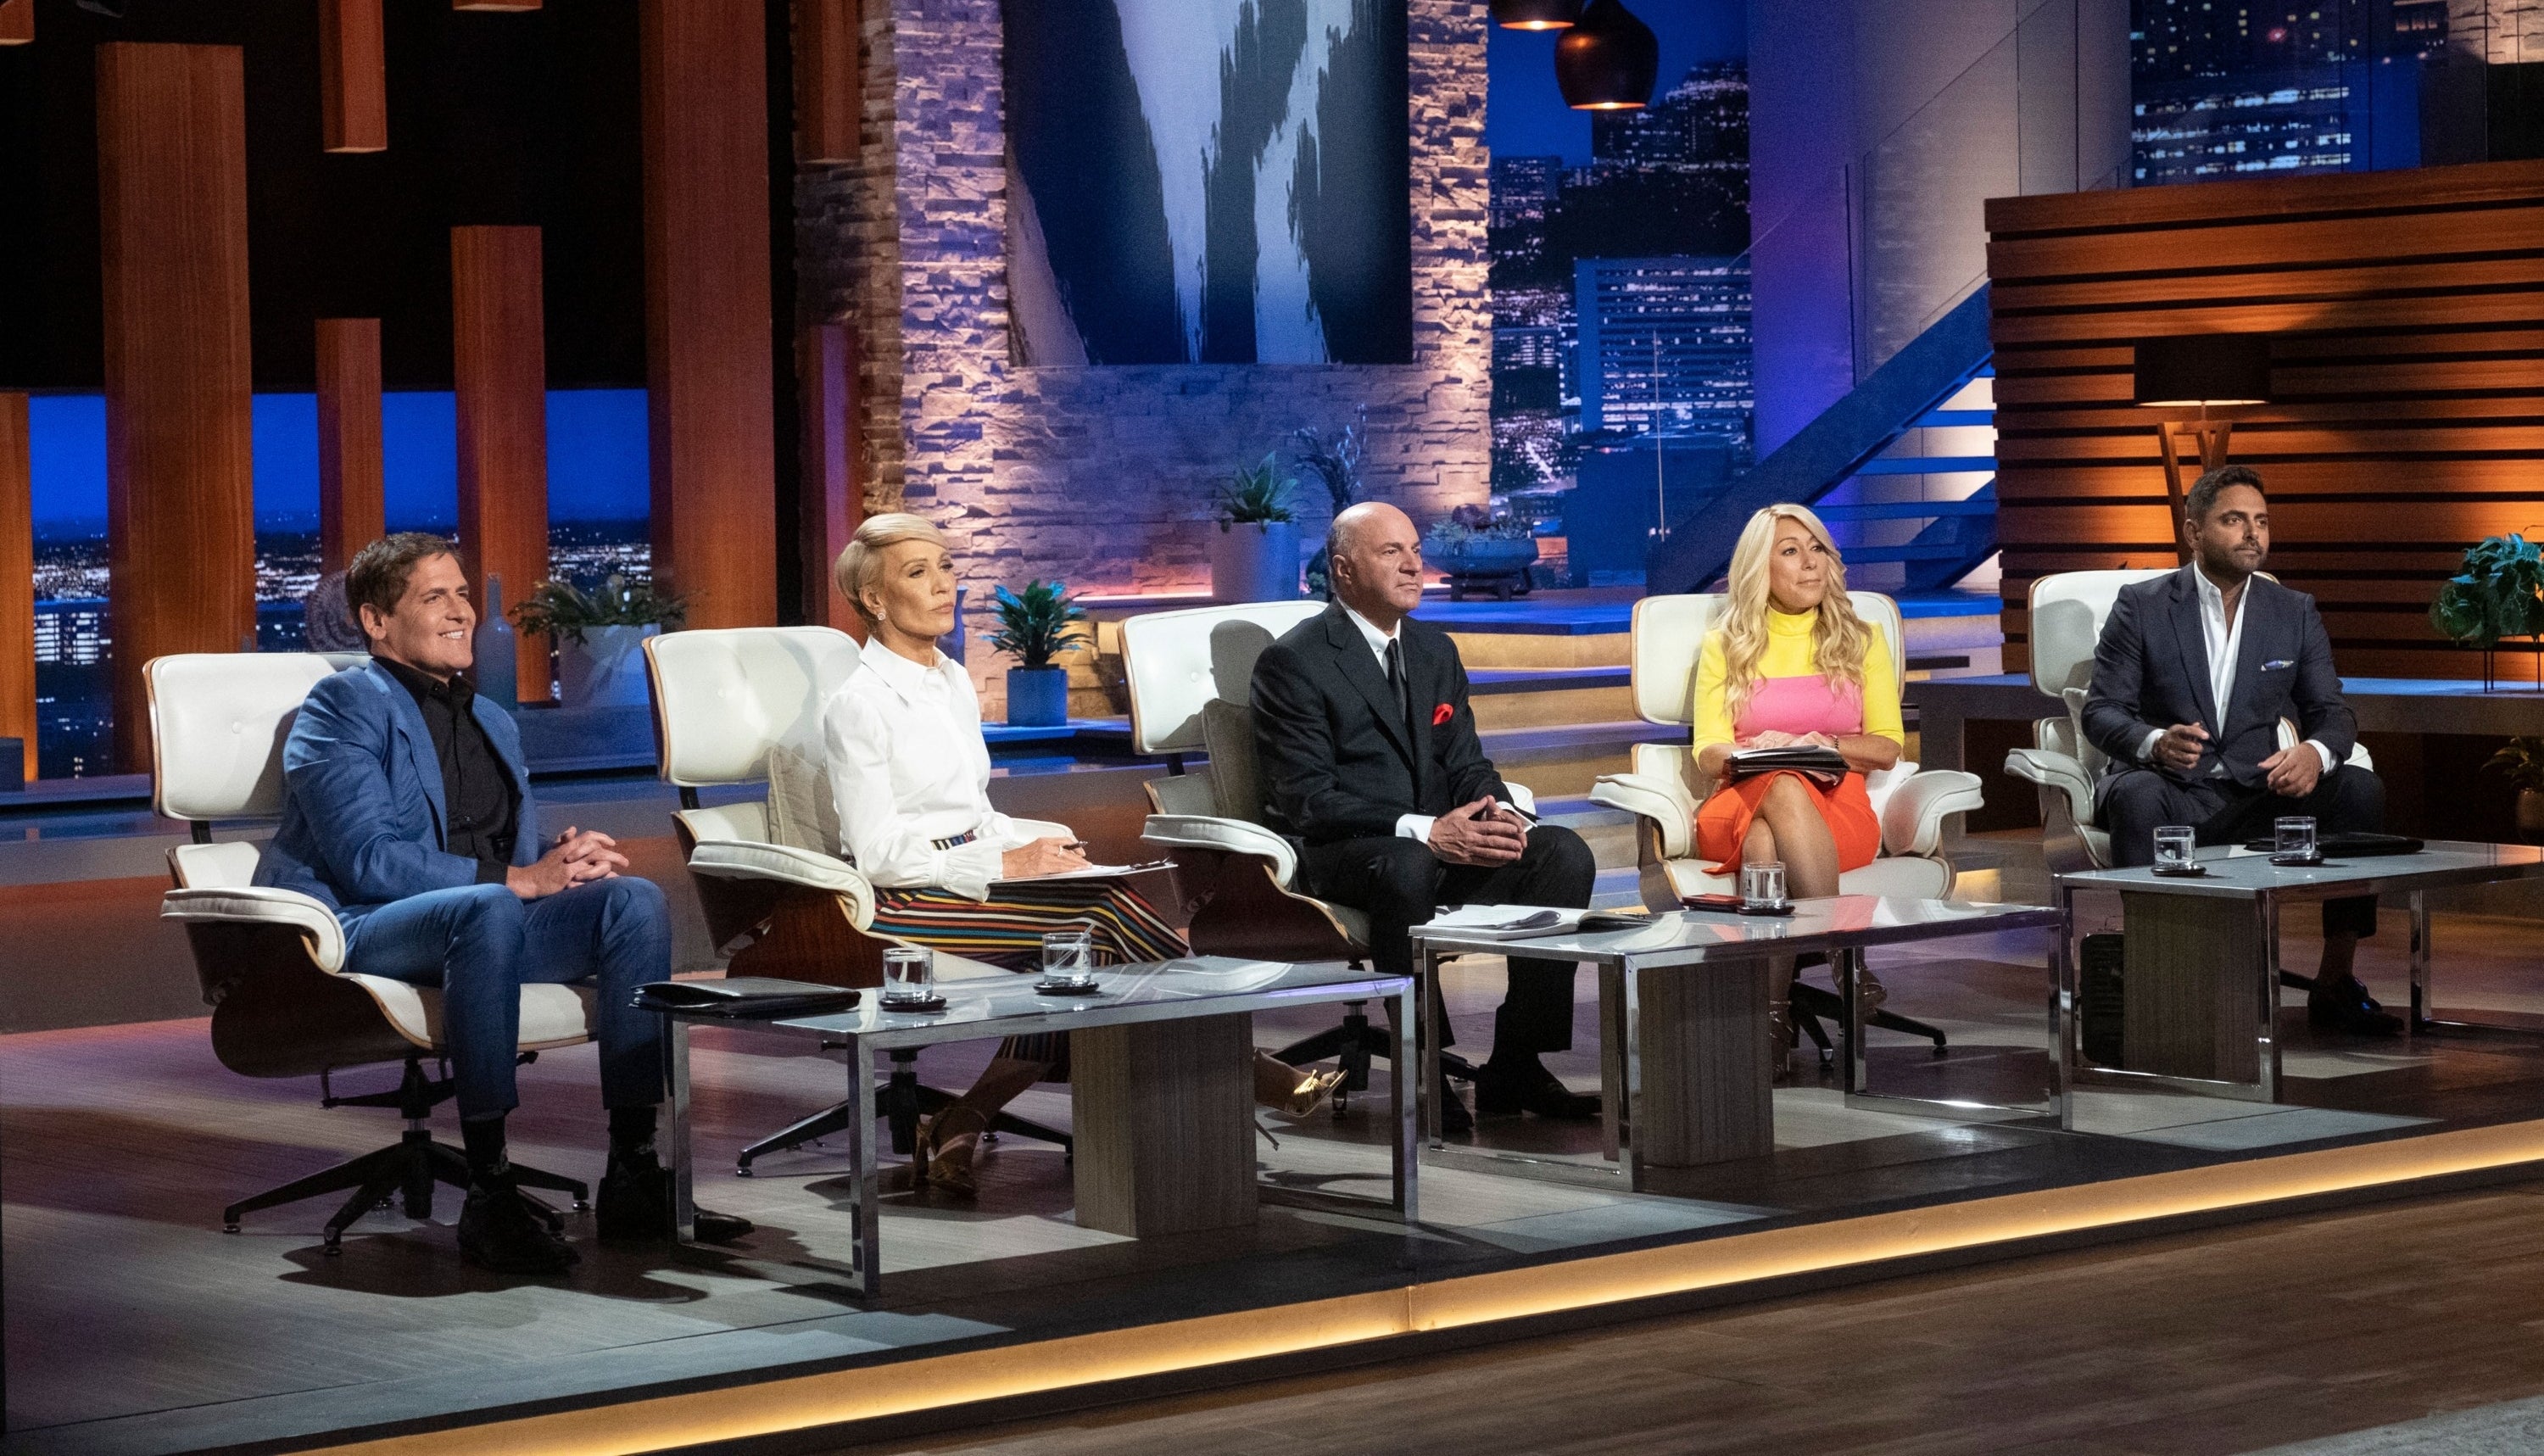 Five people seated in a row, on a TV show set designed to resemble a boardroom